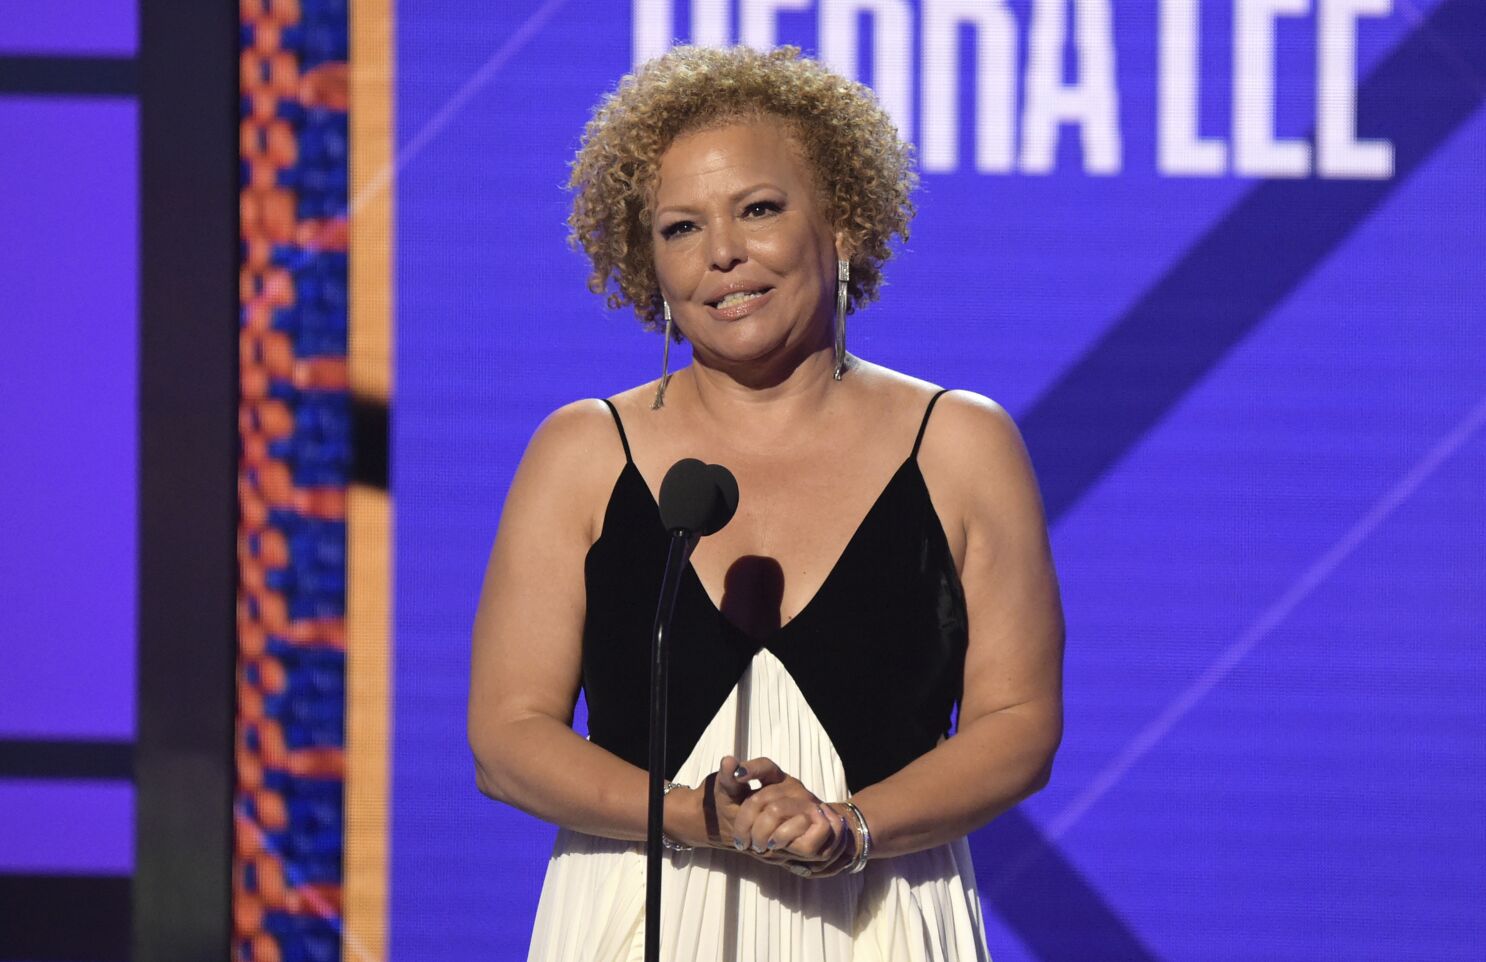 BET's Debra Lee gets candid about affair in new book - Los Angeles Times